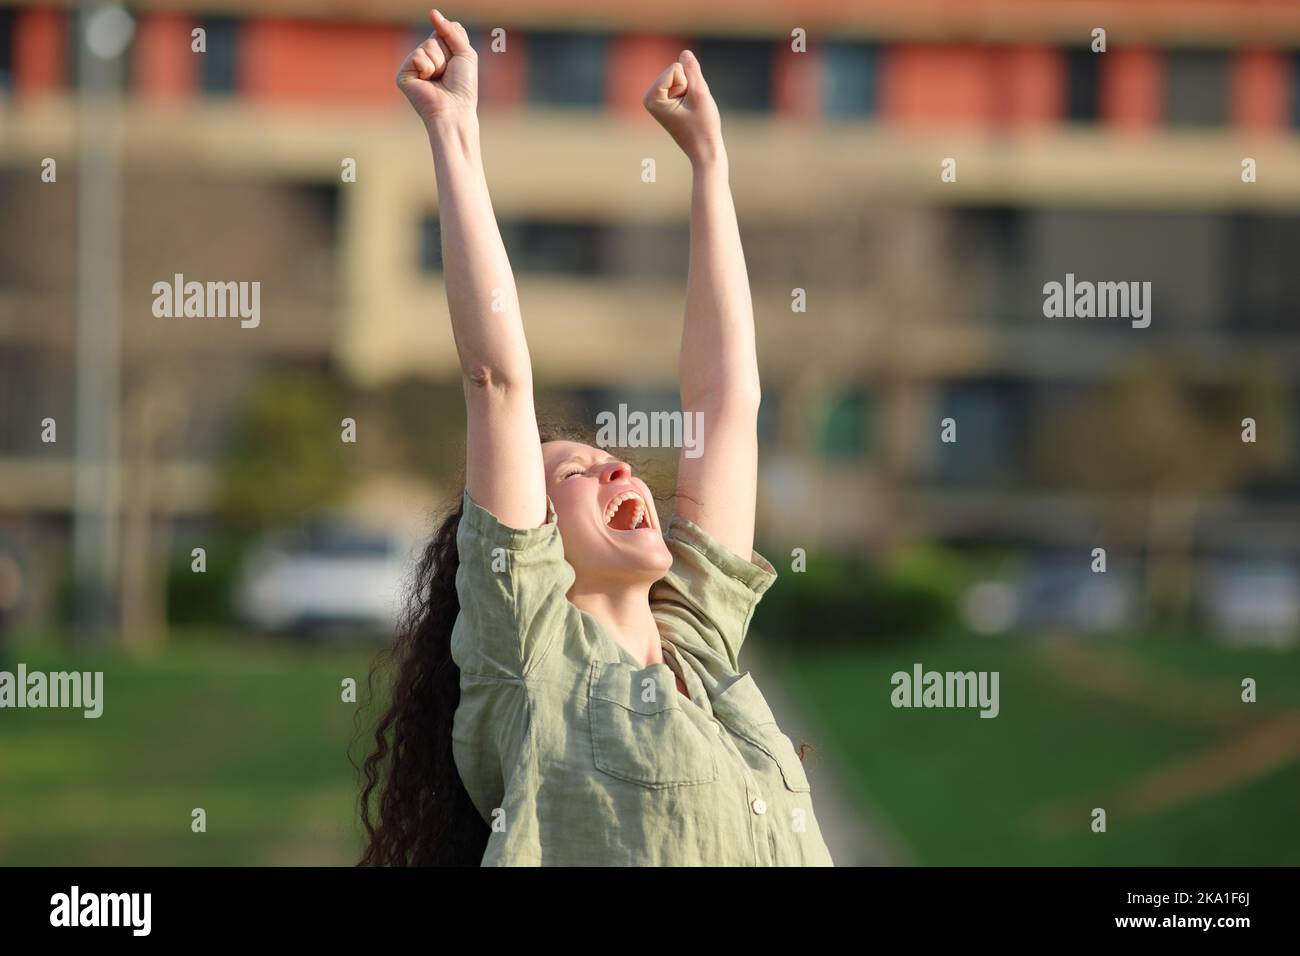 Excited woman celebrating success raising arms in a park a sunny day Stock Photo